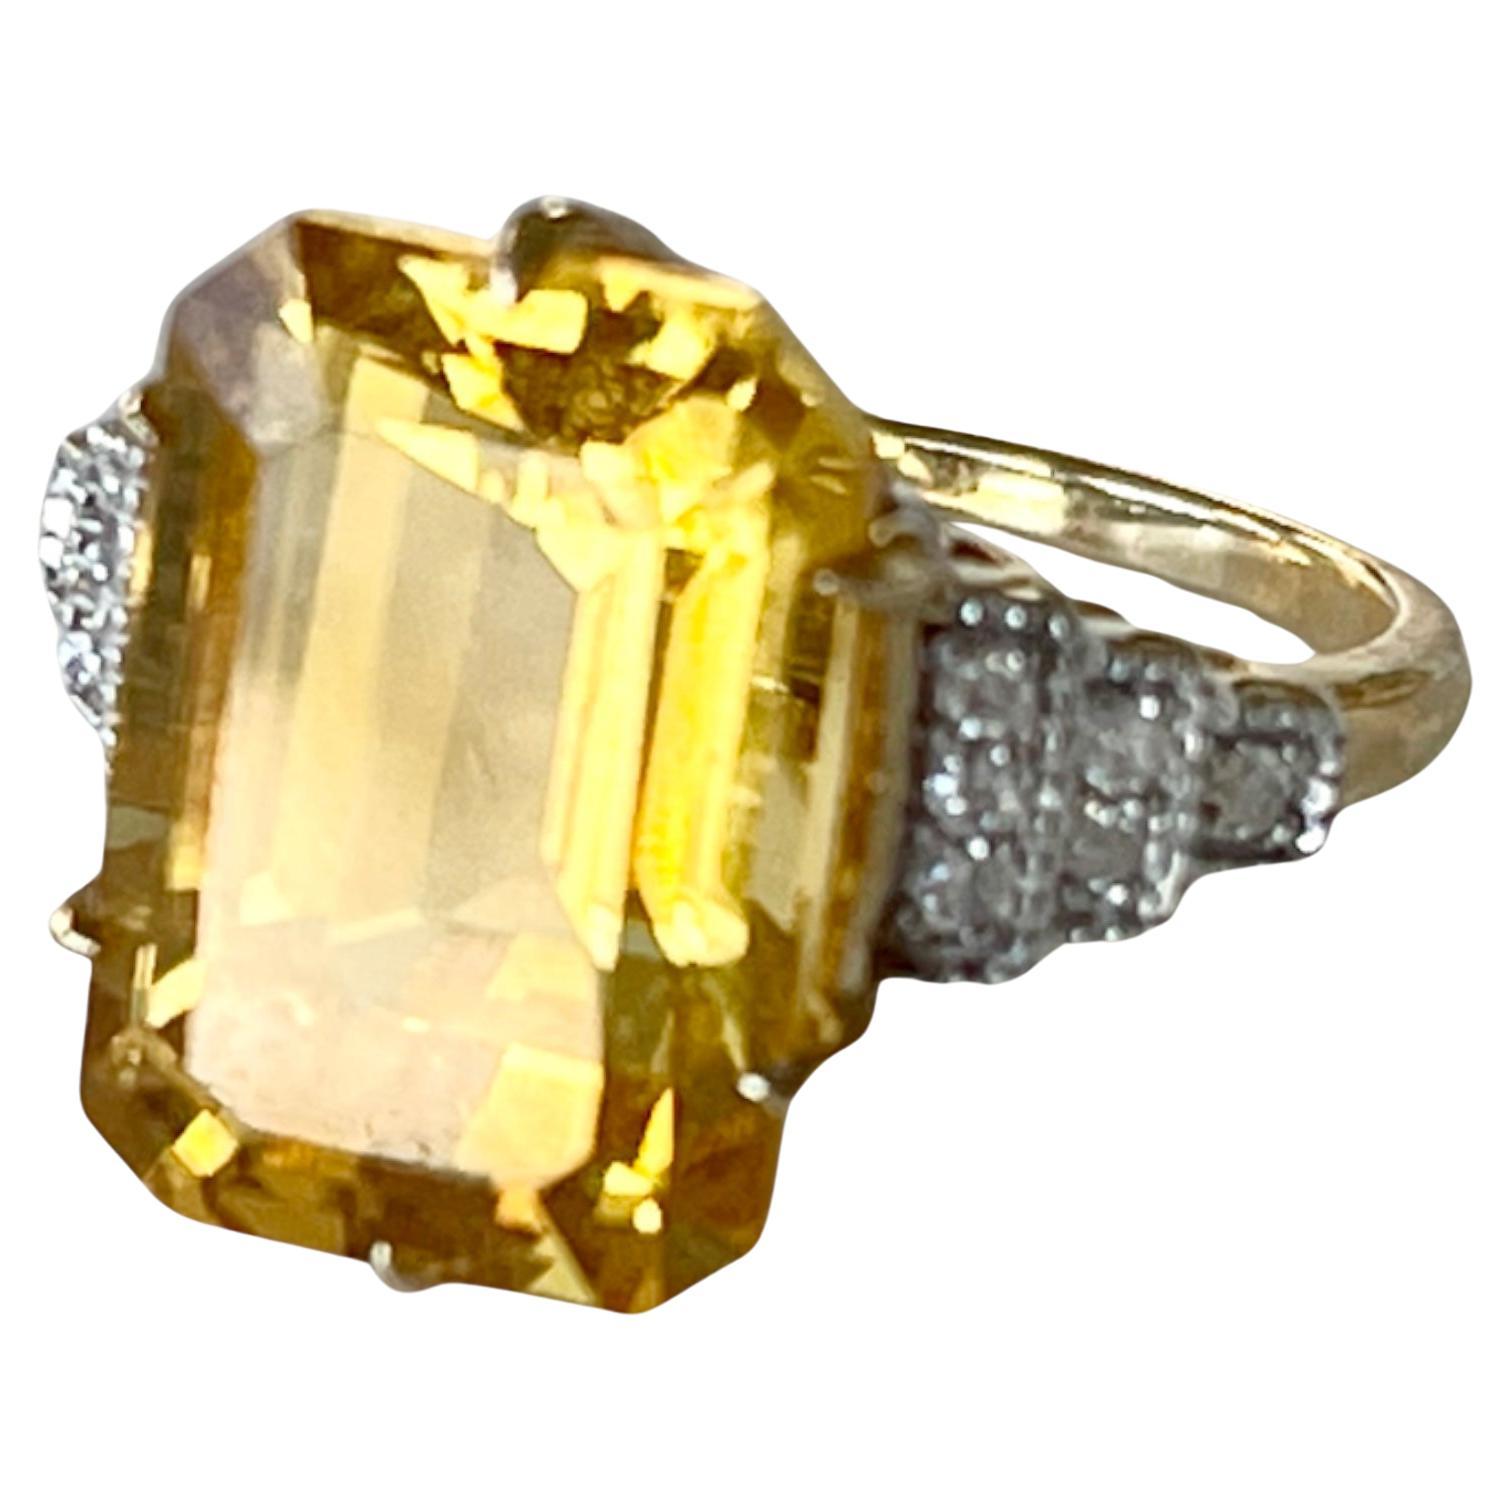 Presenting a Beautiful, Natural Citrine & Diamond Dress Ring.

The Citrine possesses a warm, golden colour that will brighten up any day!  It is emerald cut and weighs approximately 7.50 carats.  The gem is very clean with a lot of shine which made